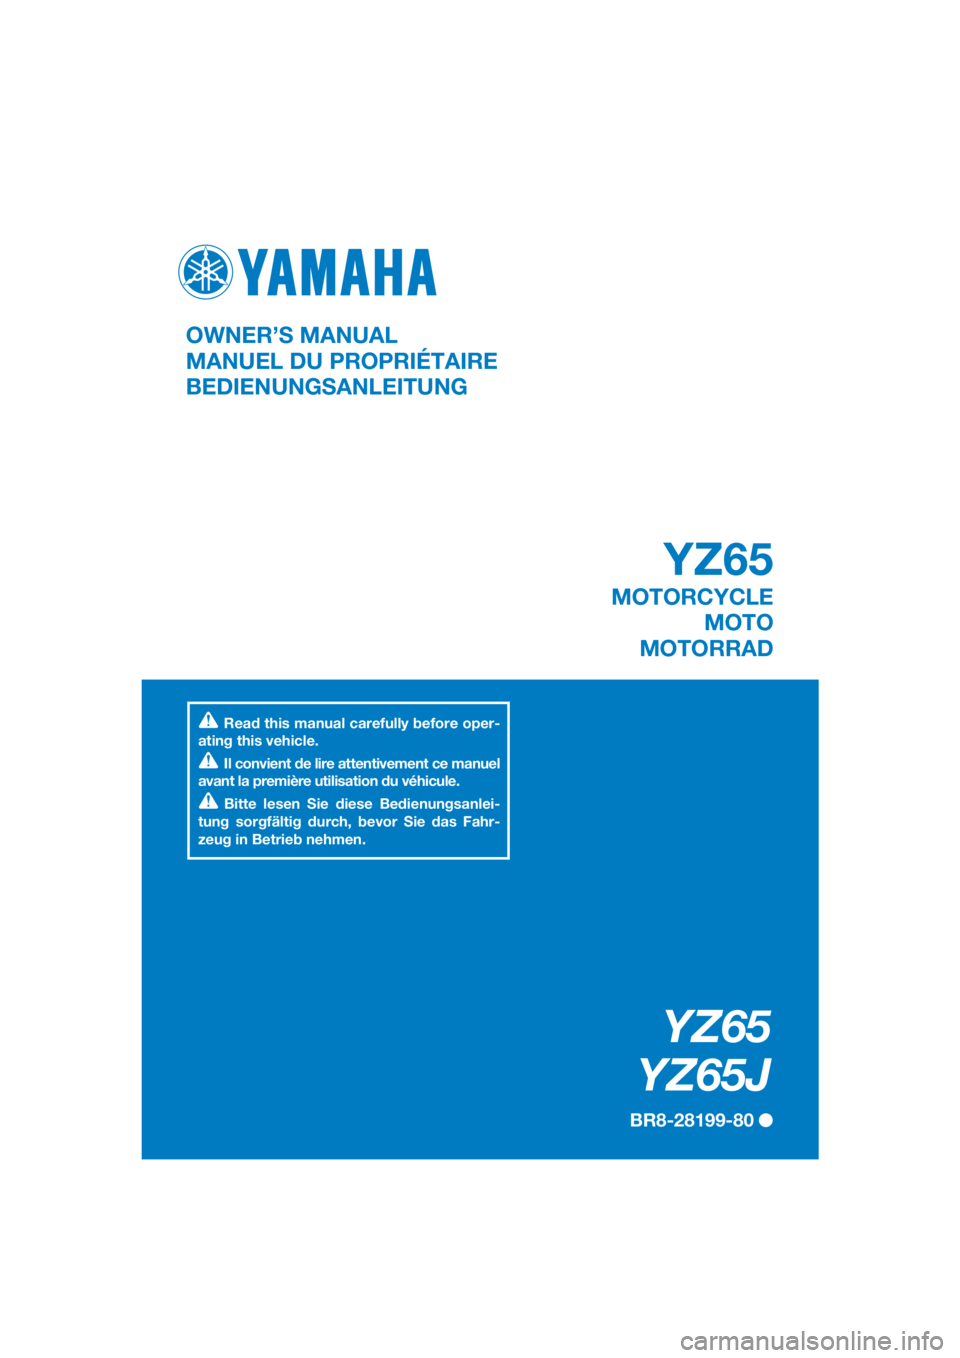 YAMAHA YZ65 2018  Owners Manual DIC183
YZ65
YZ65J
BR8-28199-80 
OWNER’S MANUAL
MANUEL DU PROPRIÉTAIRE
BEDIENUNGSANLEITUNG
Read this manual carefully before oper-
ating this vehicle.
Il convient de lire attentivement ce manuel 
av